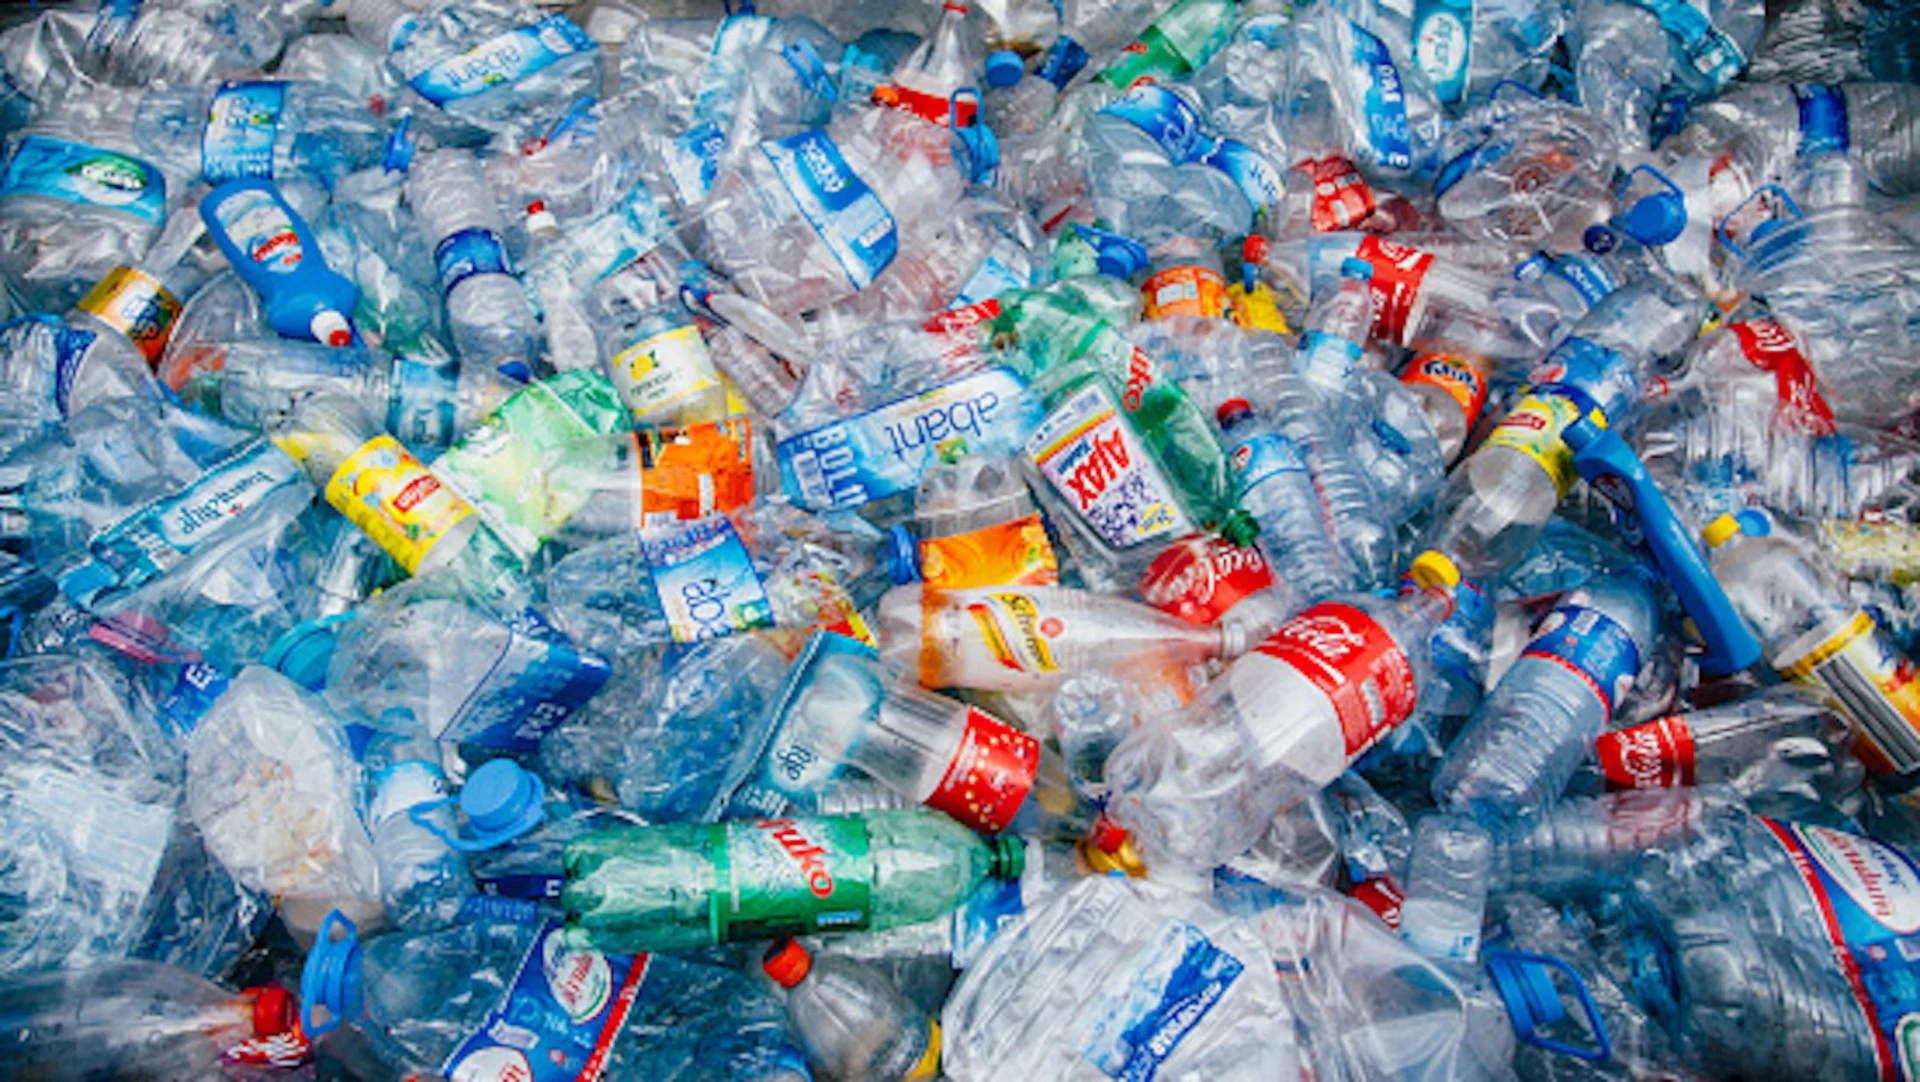 Can we end plastic pollution? Negotiators in Ottawa to work on a global treaty